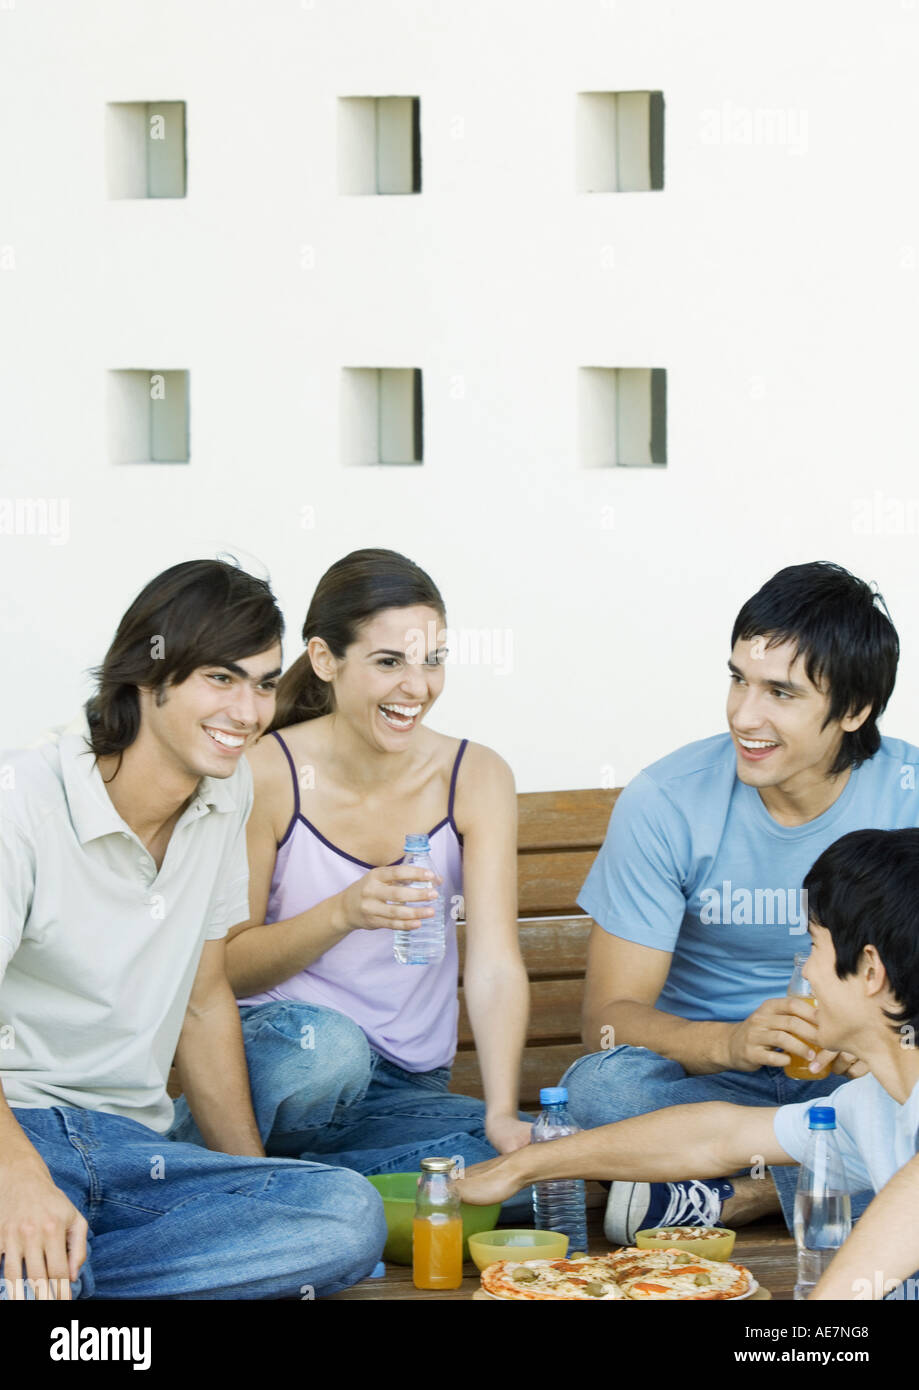 Group of young adult friends sharing meal Stock Photo